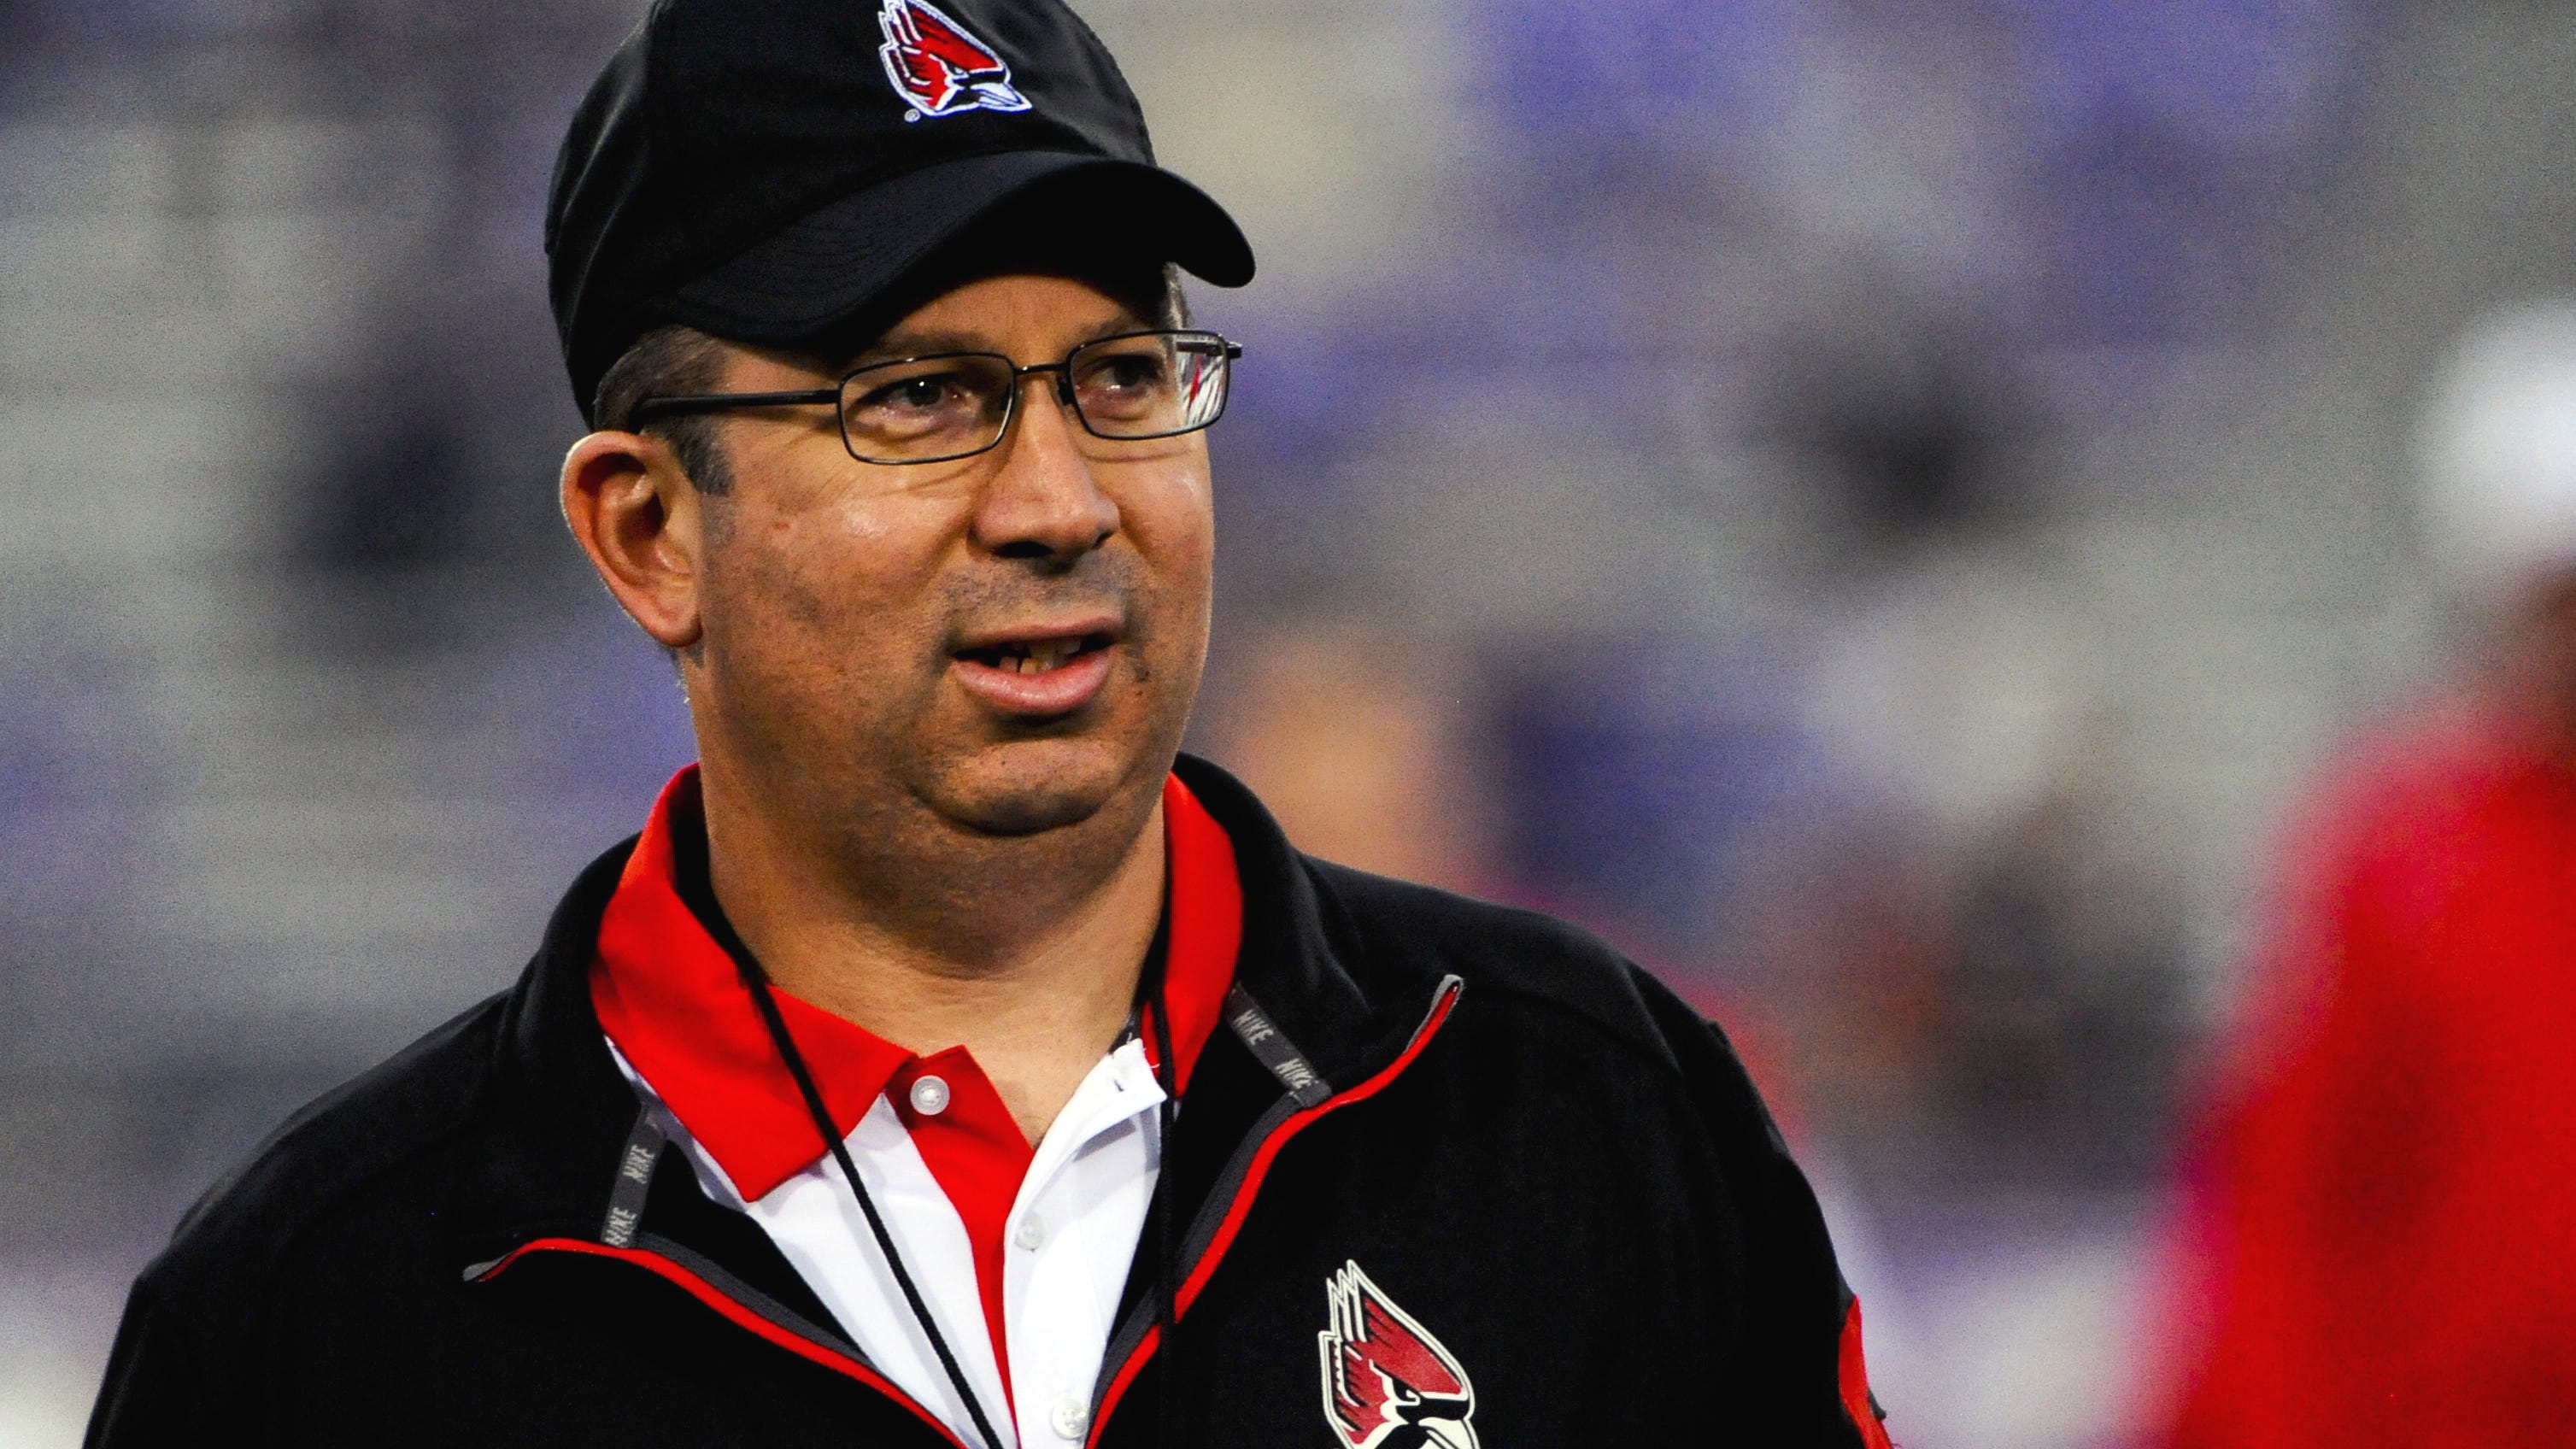 Memphis football to hire Pete Lembo as special teams coordinator - Reports